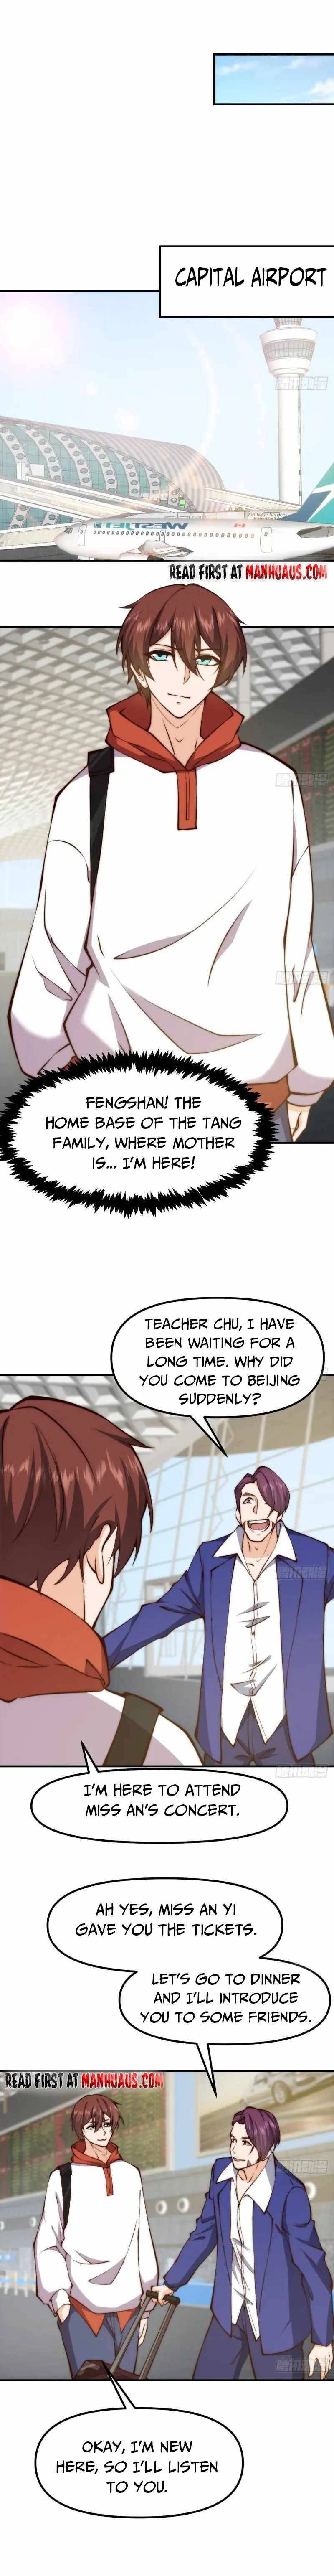 Cultivation Return on Campus Chapter 407 page 3 - MangaWeebs.in